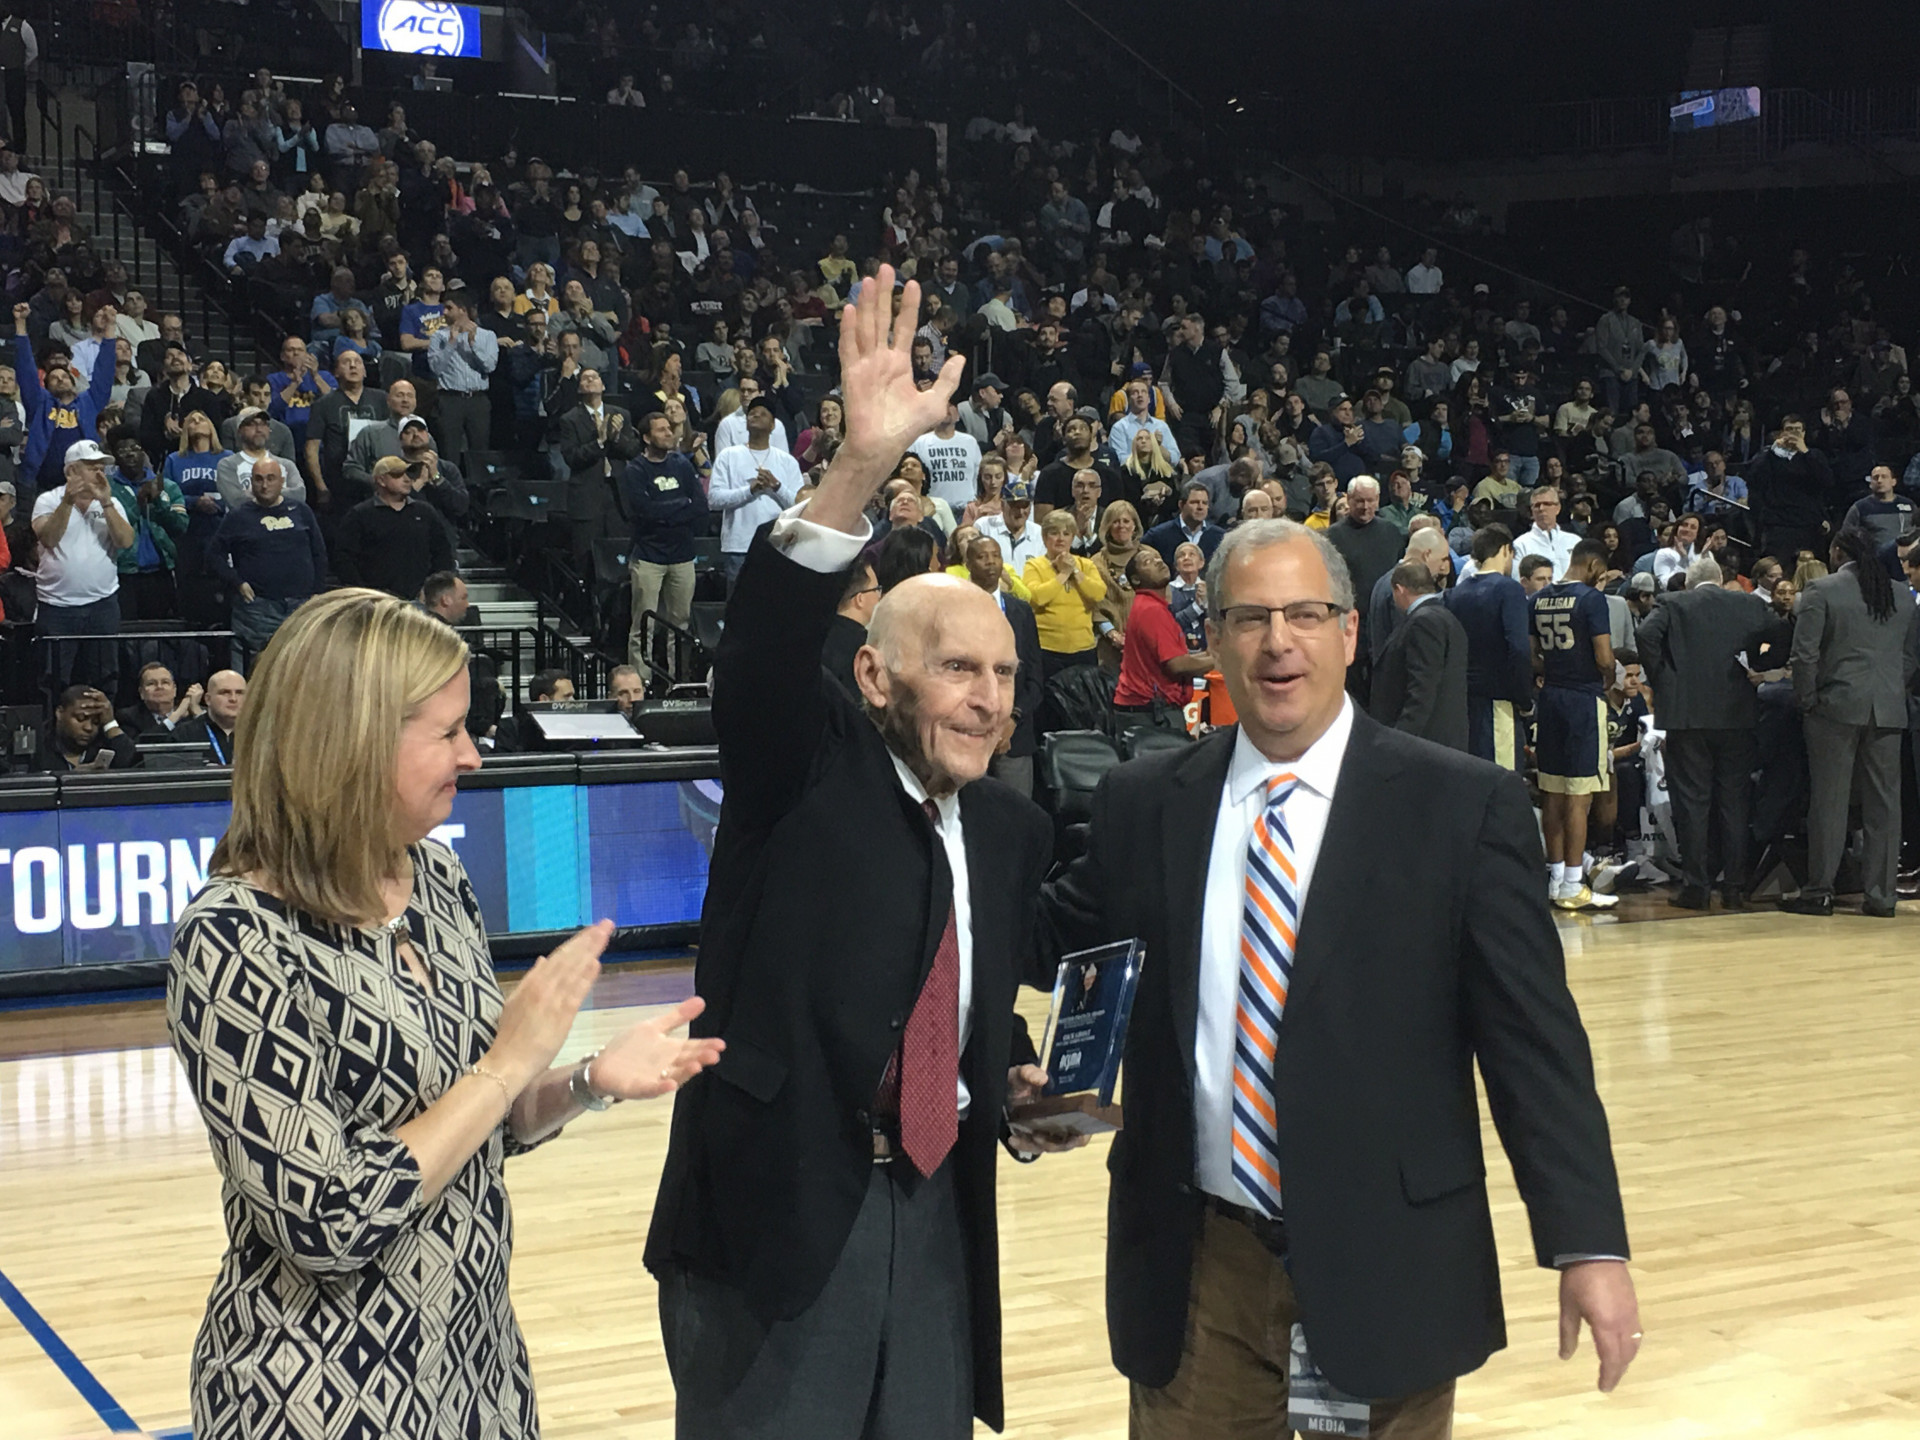 Dick Groat (center) waves to the crowd at the ACC Tournament in Brooklyn, NY, after receiving the Skeeter Francis Award for contributions to coverage of the ACC